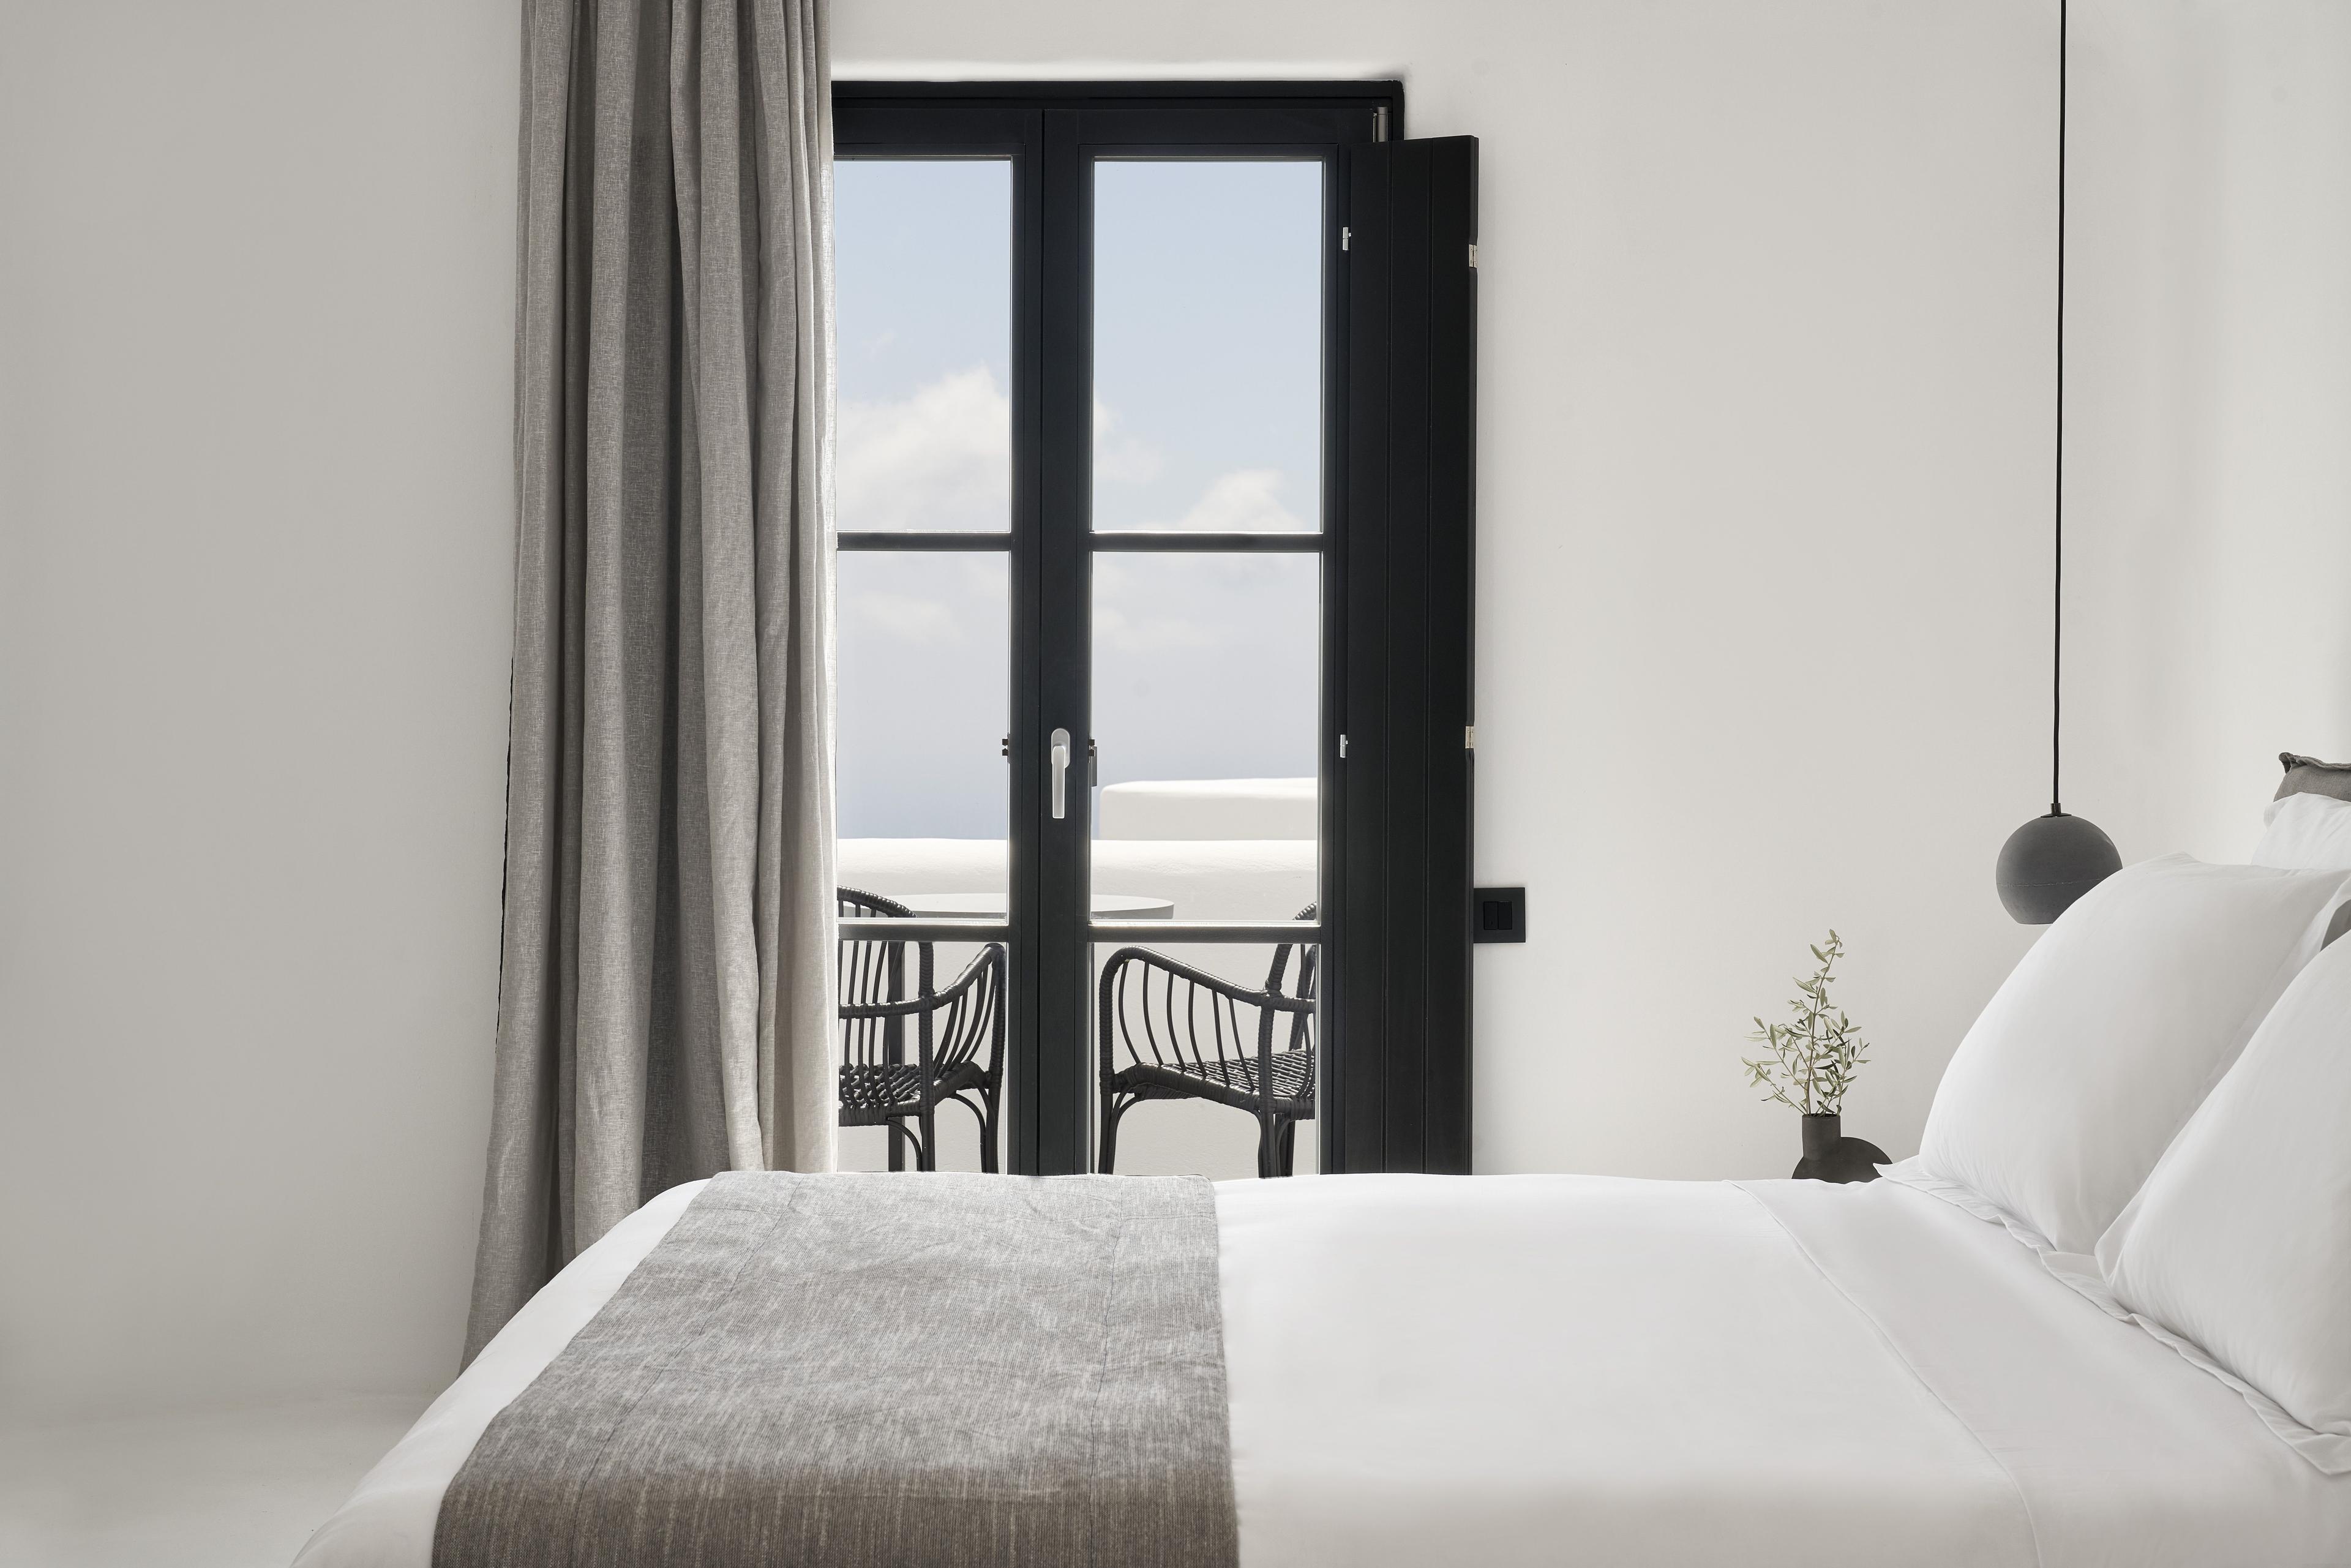 Situated on the first floor, our Deluxe rooms features a king size bed and a bathroom with luxury toiletries. This Deluxe Room opens out to a spacious terrace, boasting incredible views to the Caldera and the Aegean Sea.